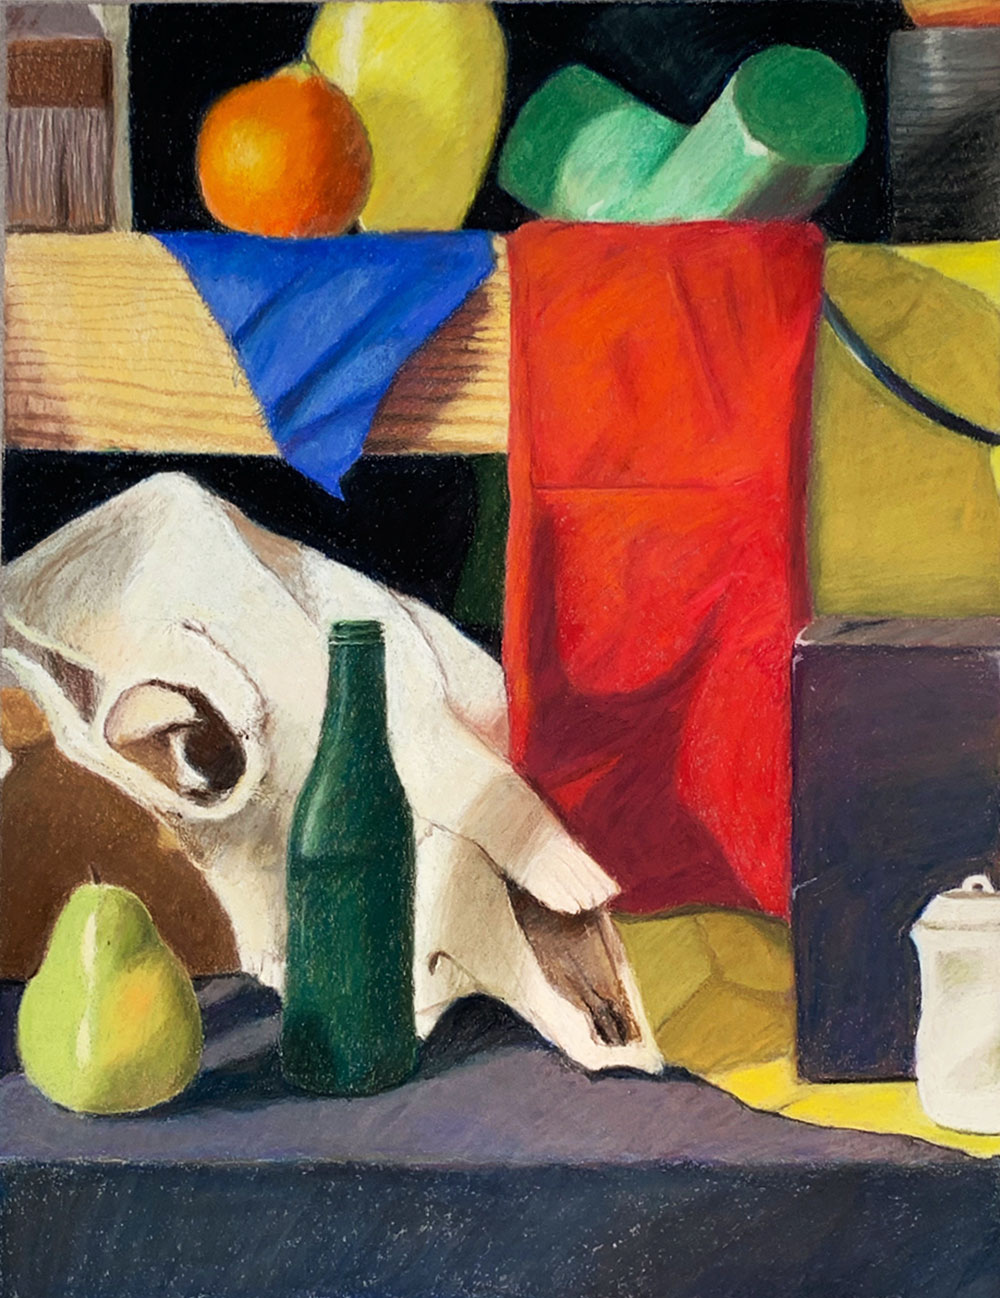 Colorful pastel still life drawing of: a skull, pear, orange, and a green glass bottle,